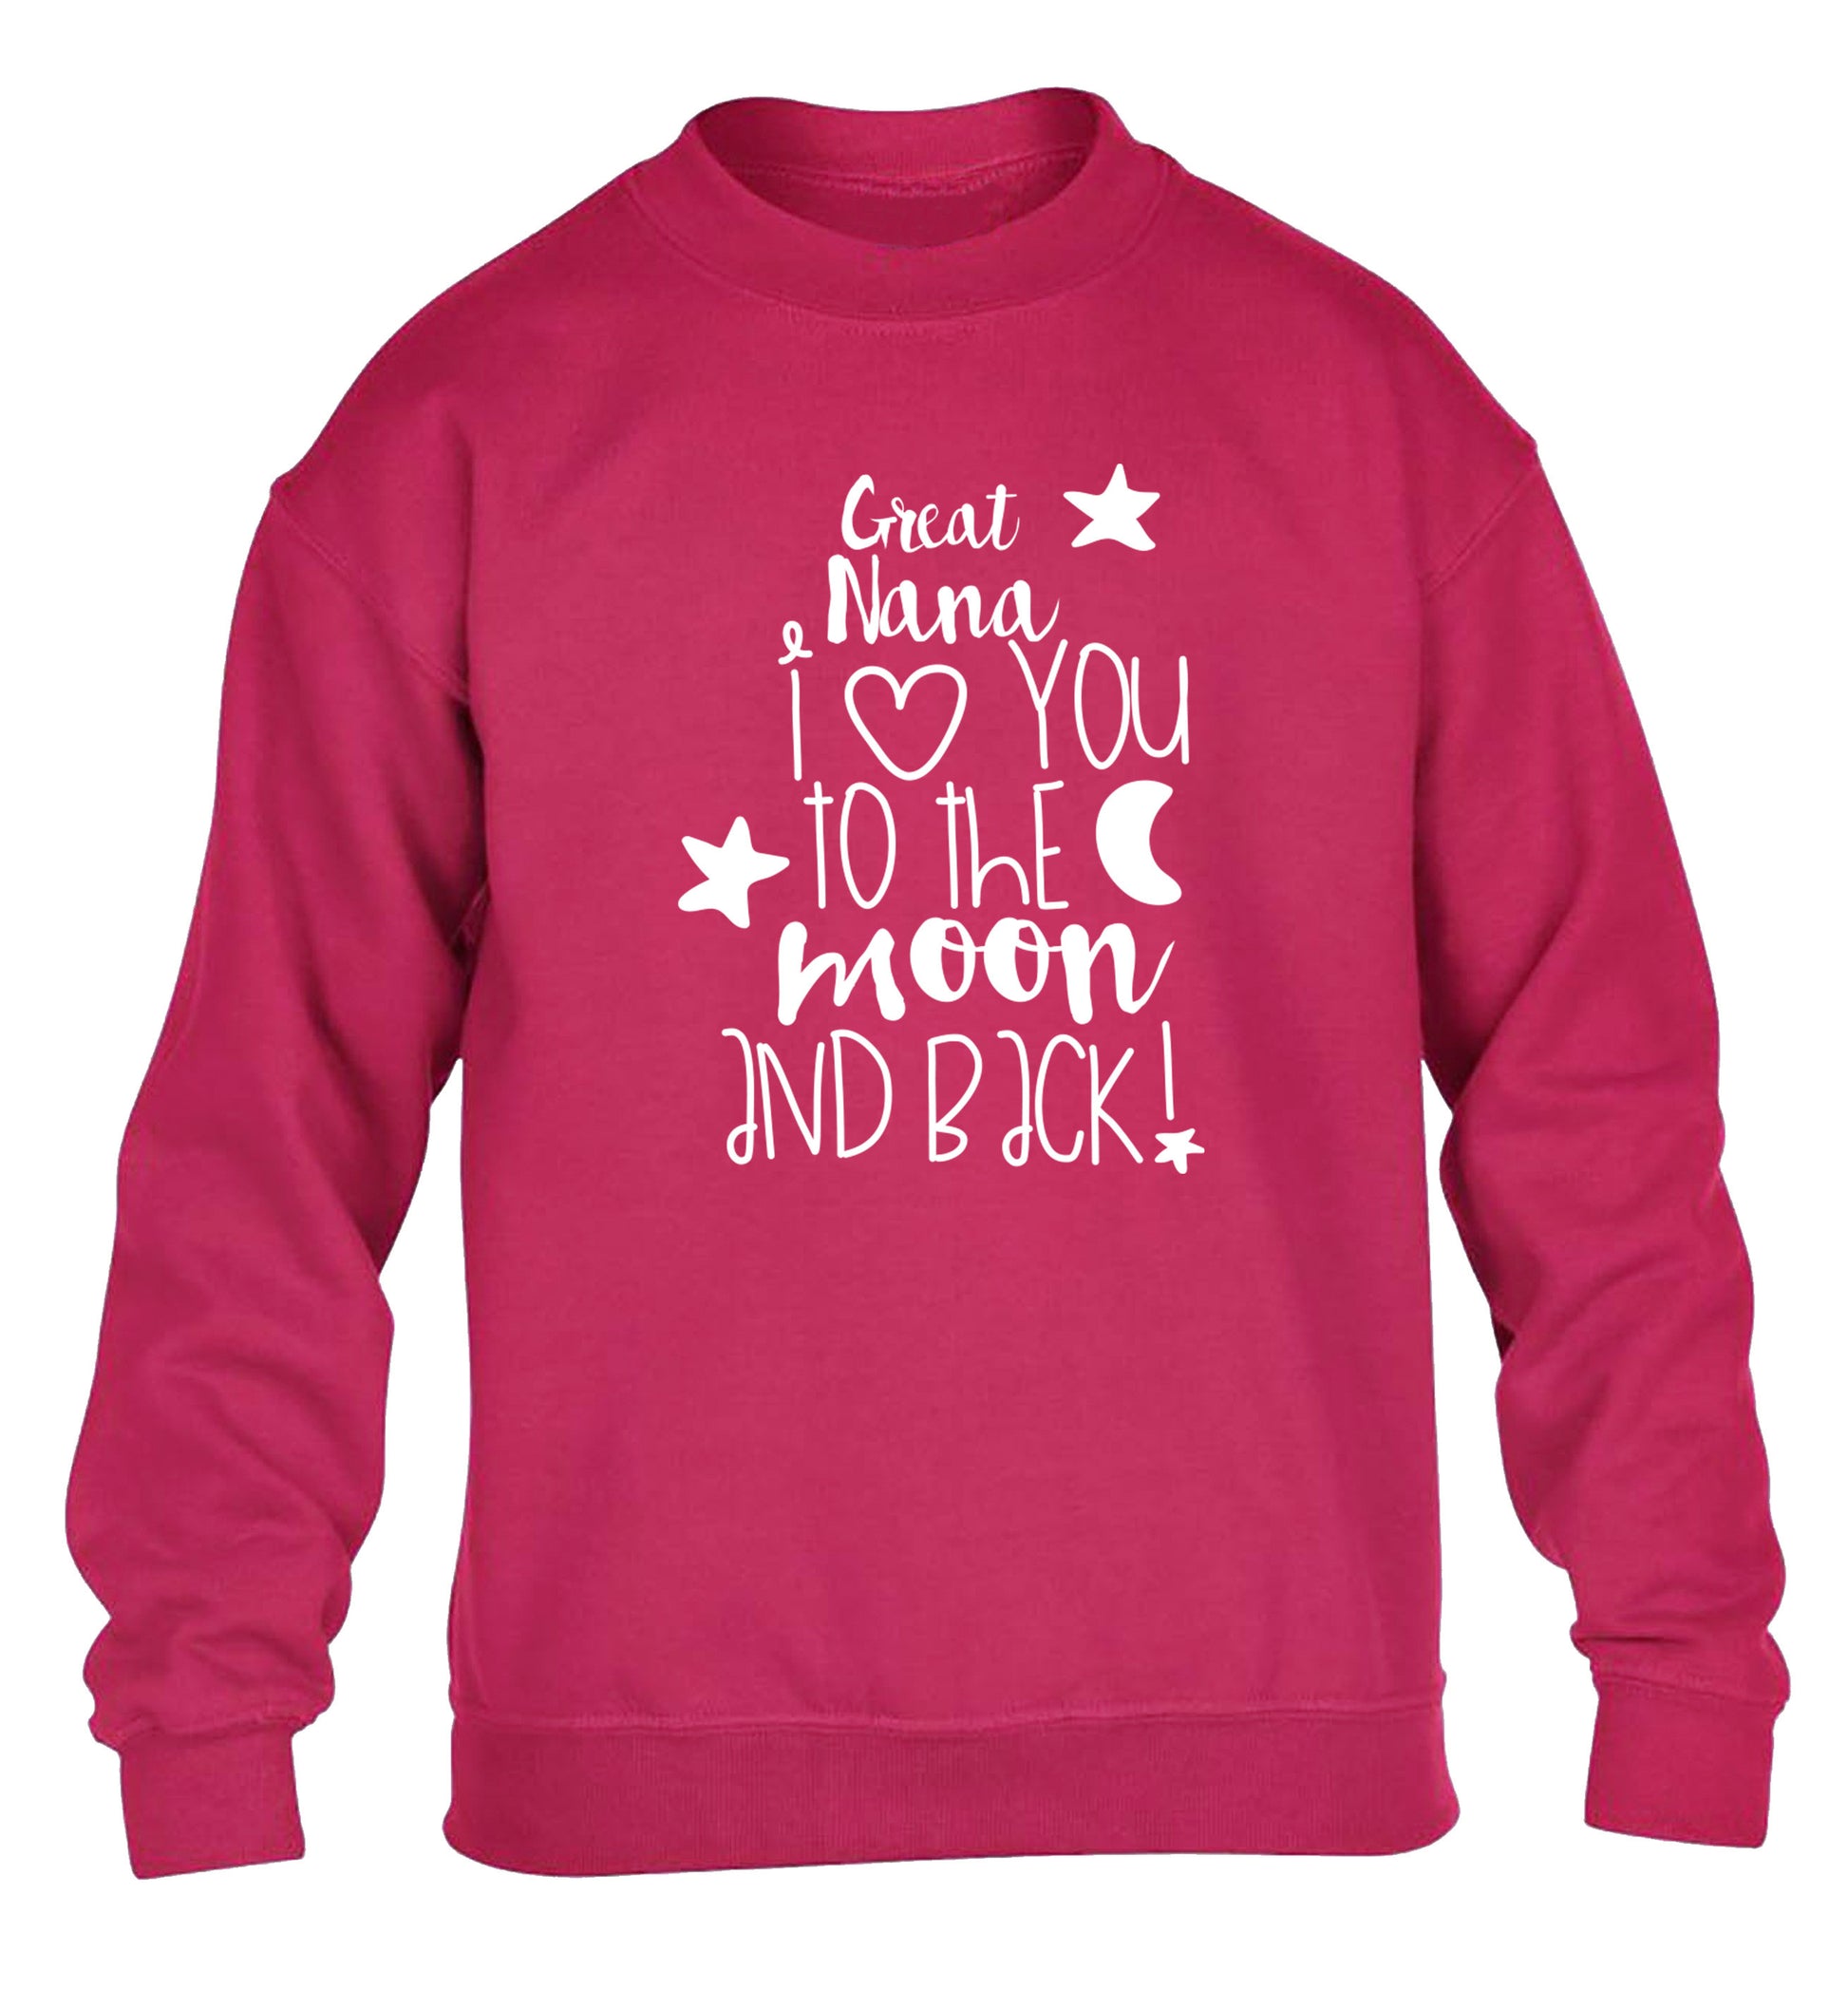 Great Nana I love you to the moon and back children's pink  sweater 12-14 Years